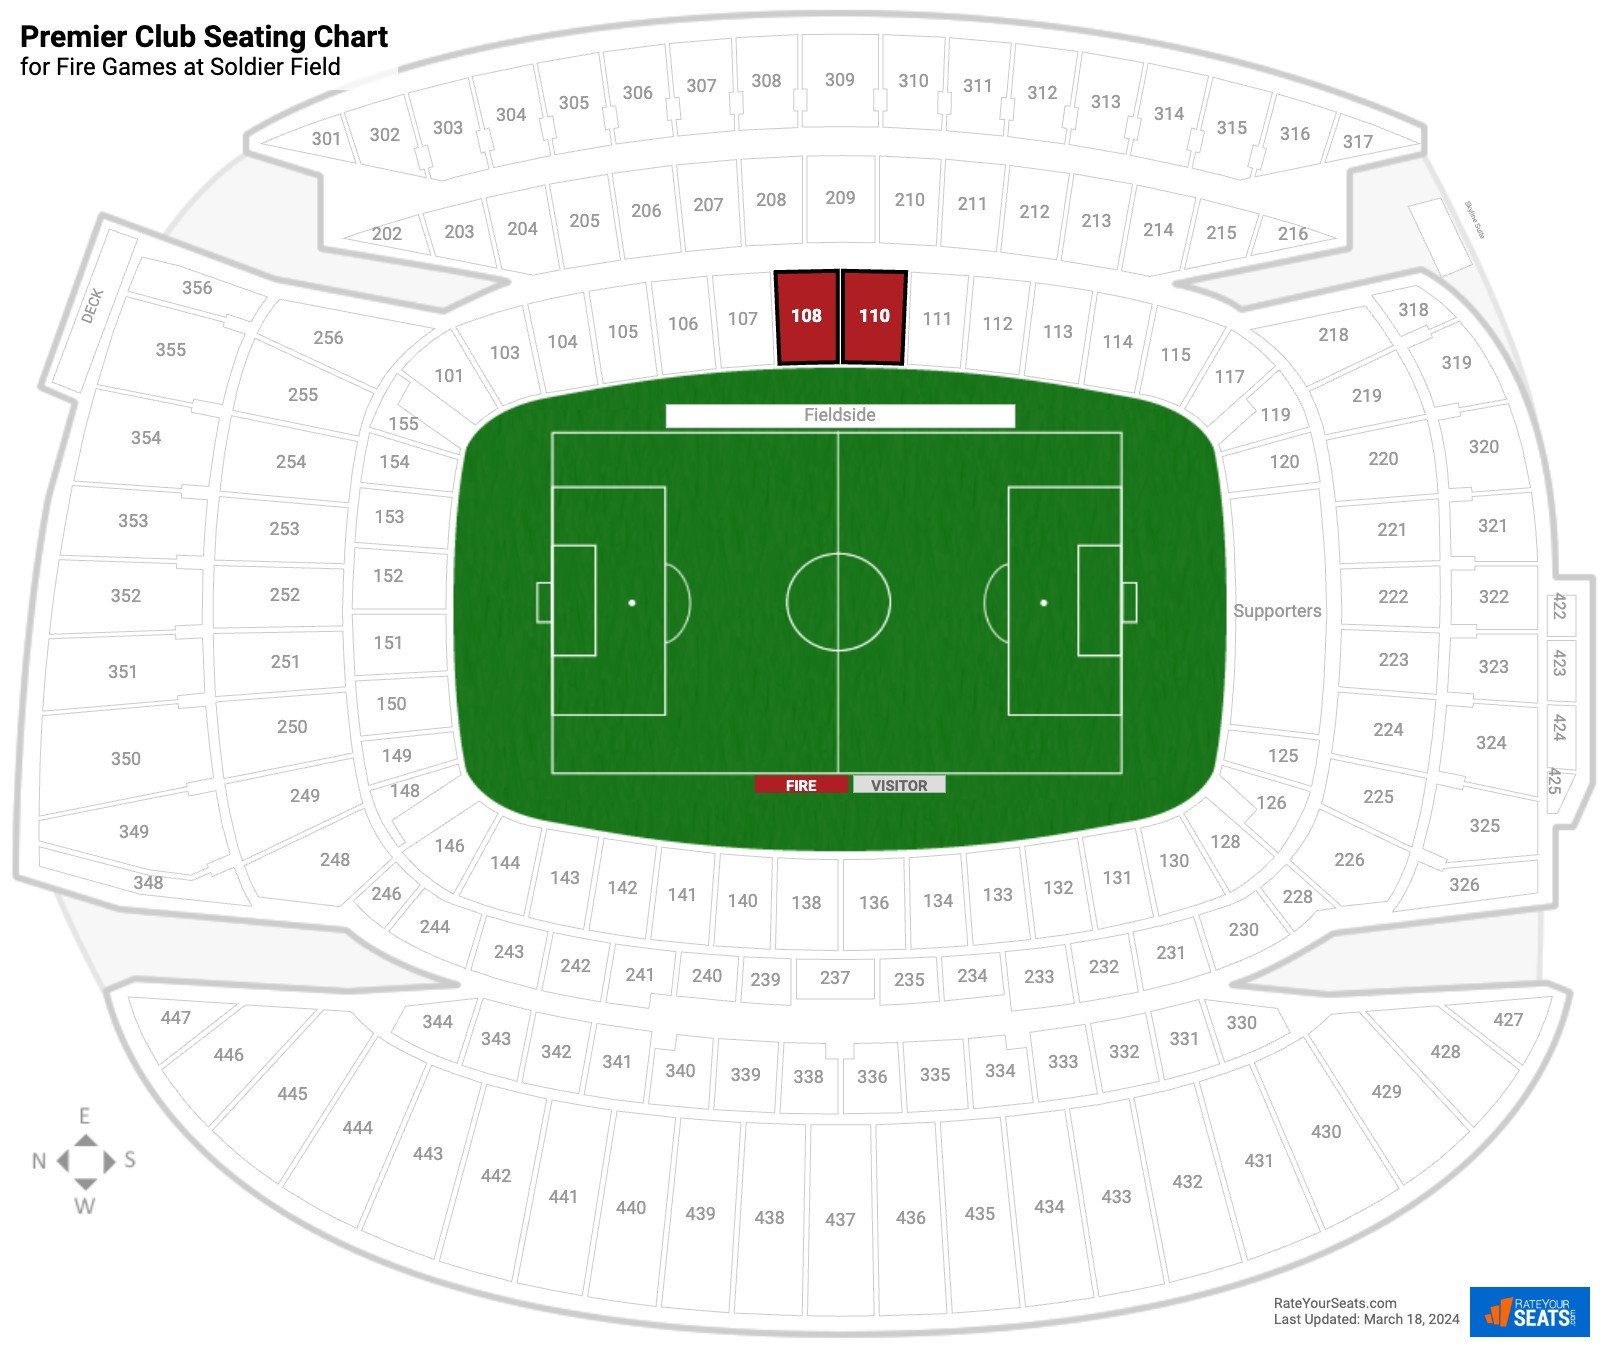 Fire Premier Club Seating Chart at Soldier Field